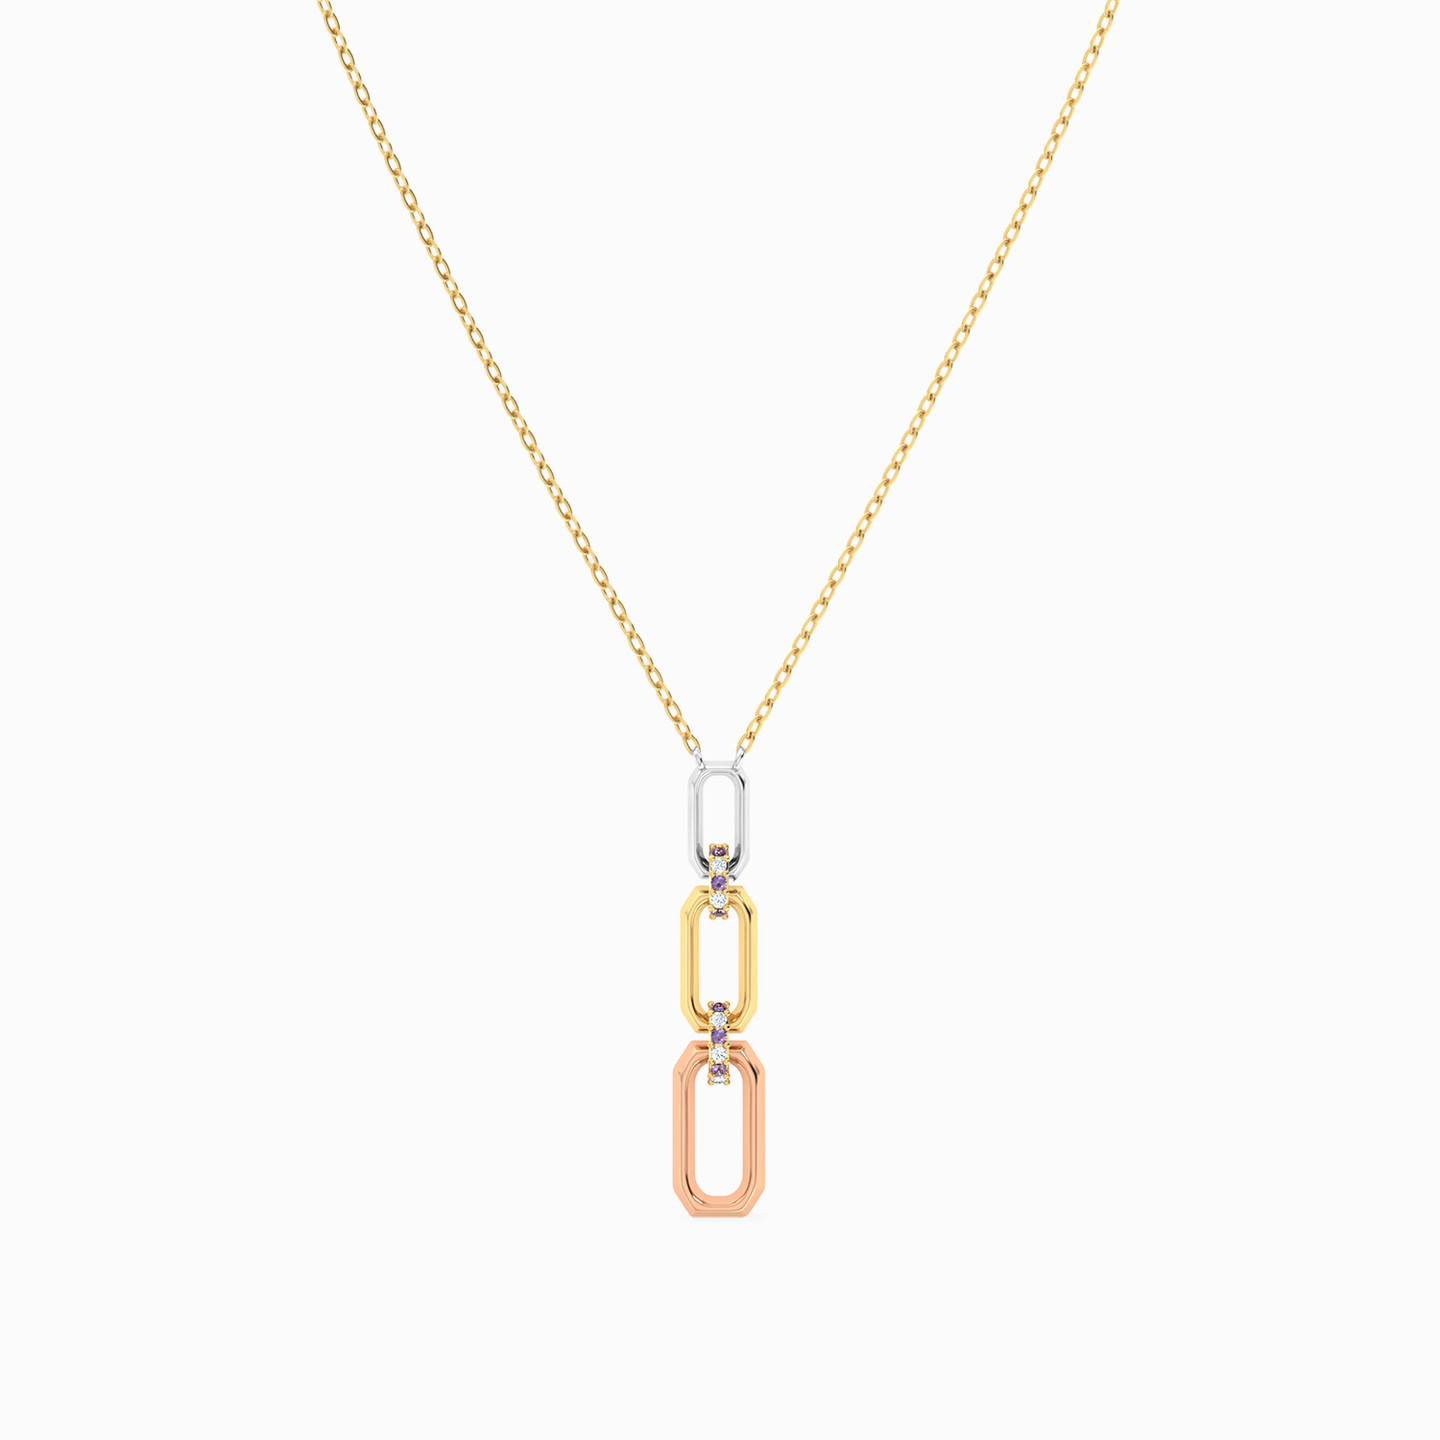 Rectangle Shaped Colored Stones Pendant with 18K Gold Chain - 3